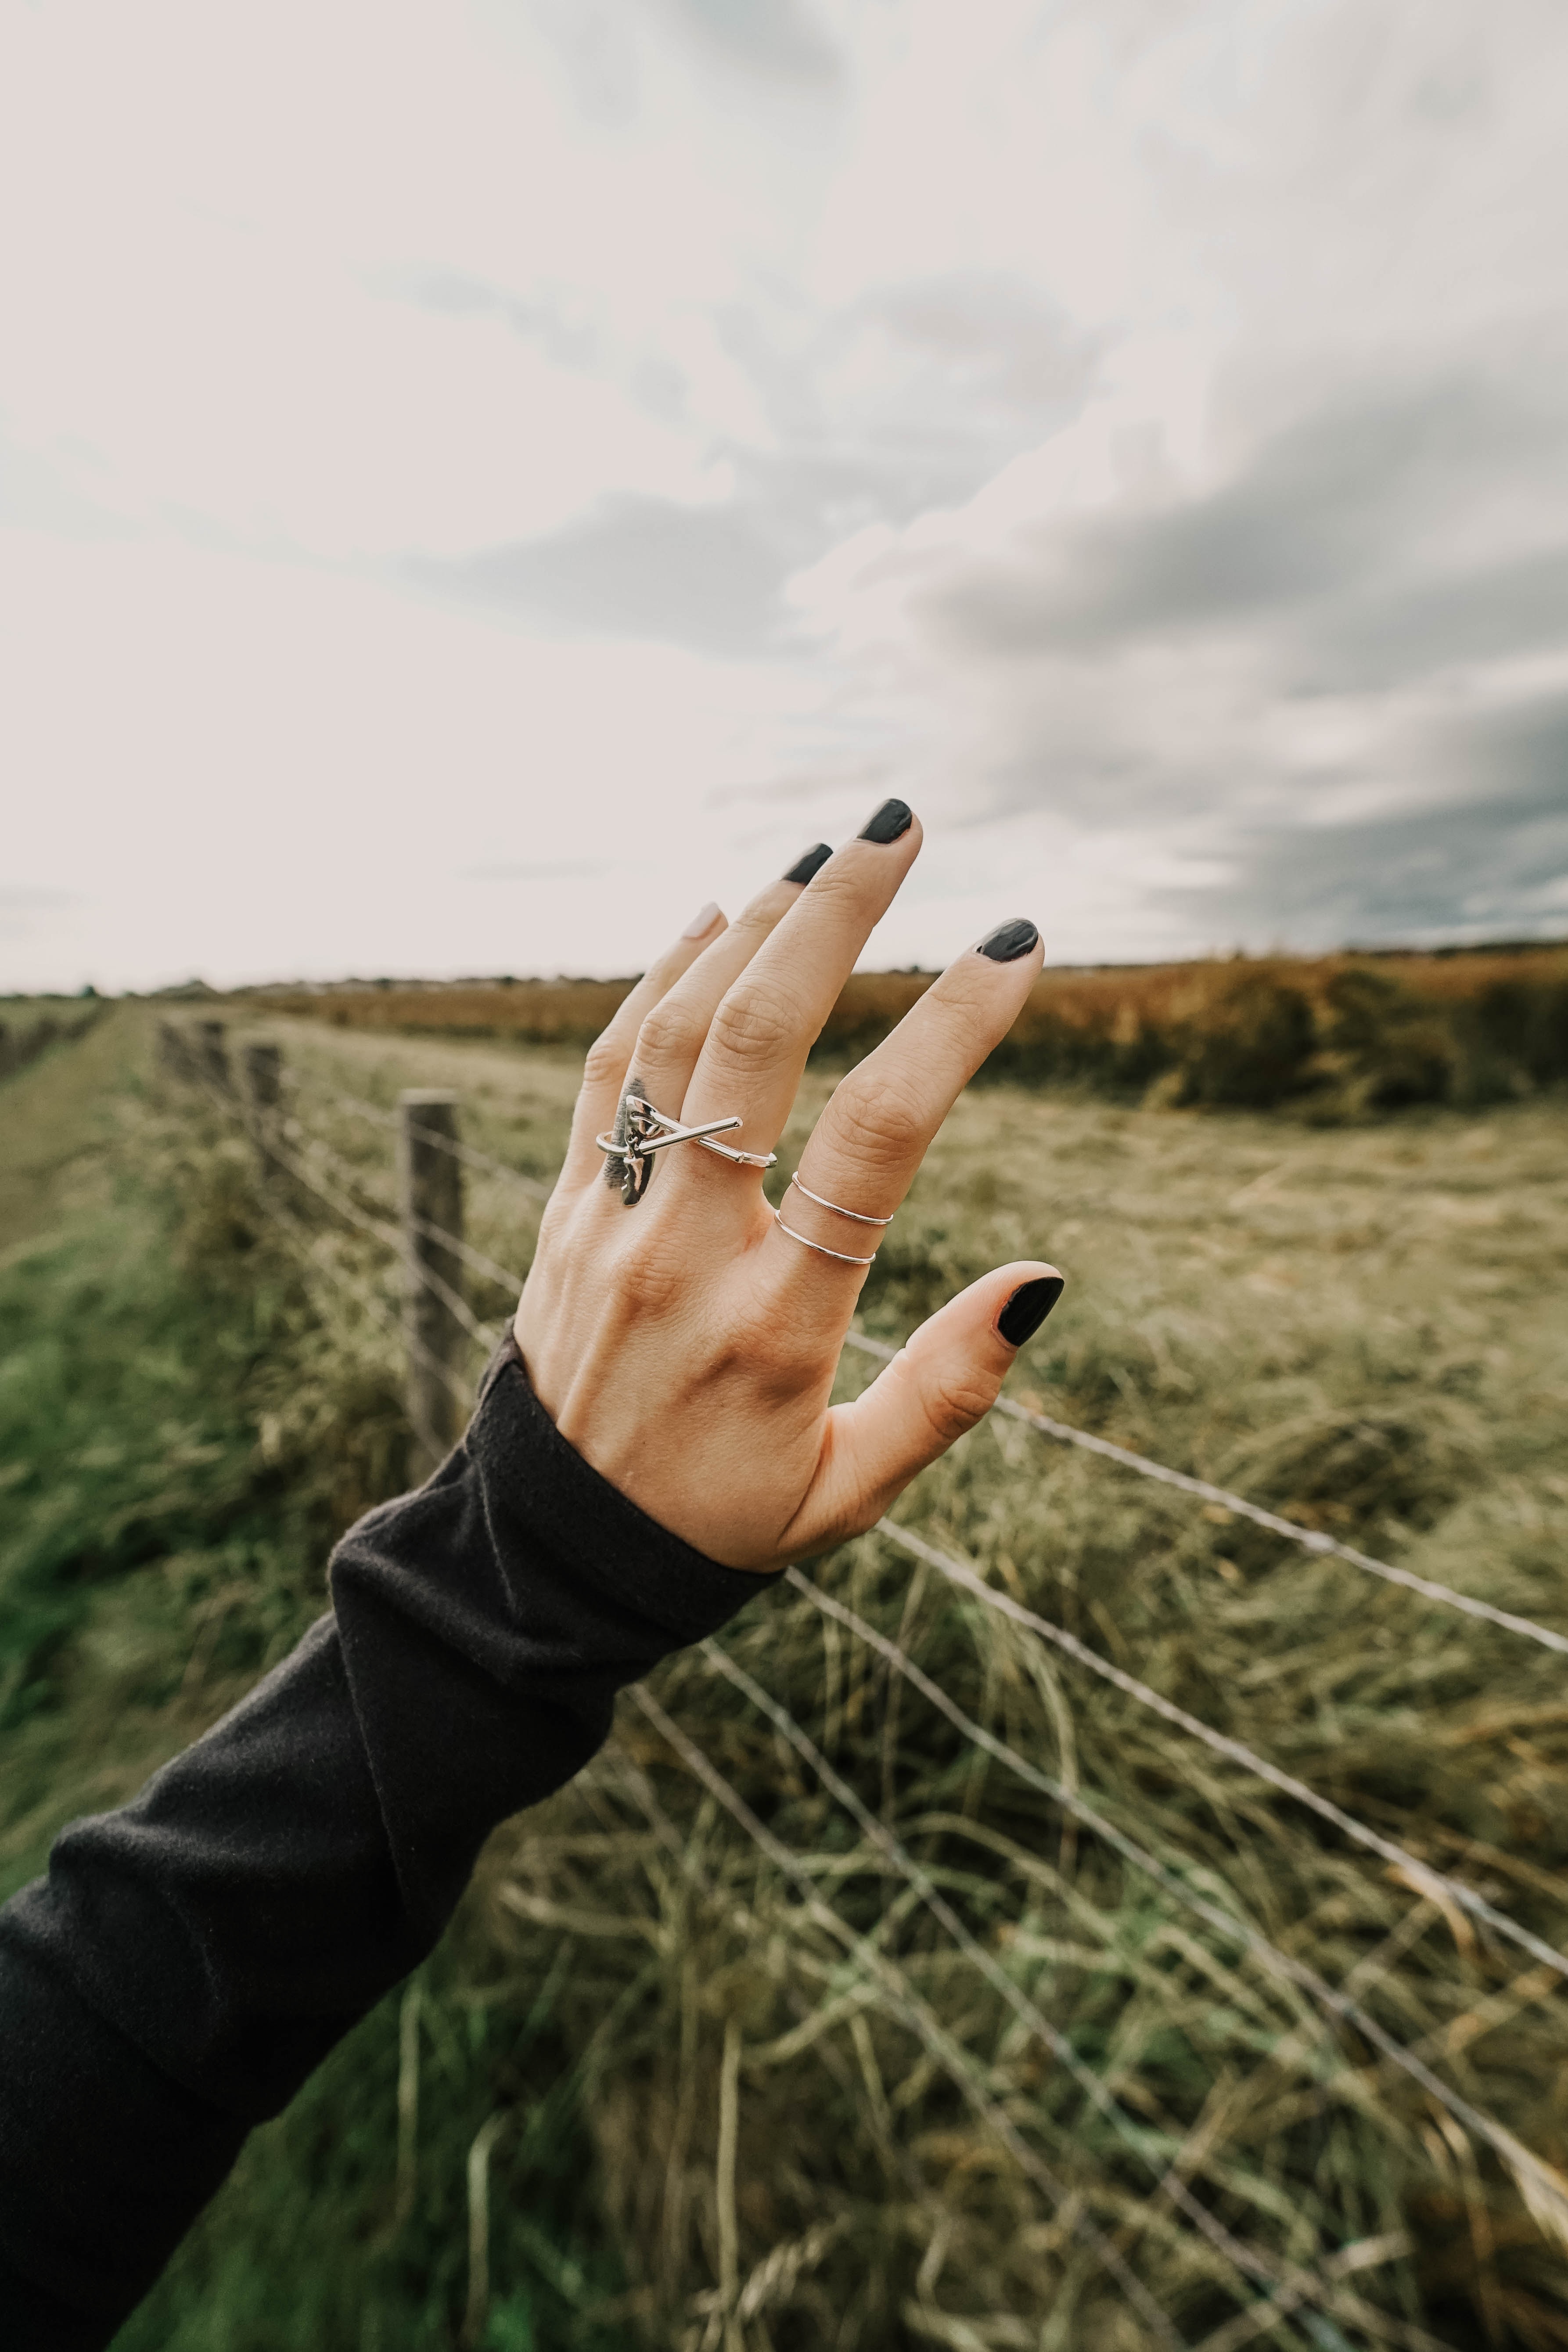 rings, hand, miscellanea, miscellaneous, field, fence, decoration, fingers, manicure